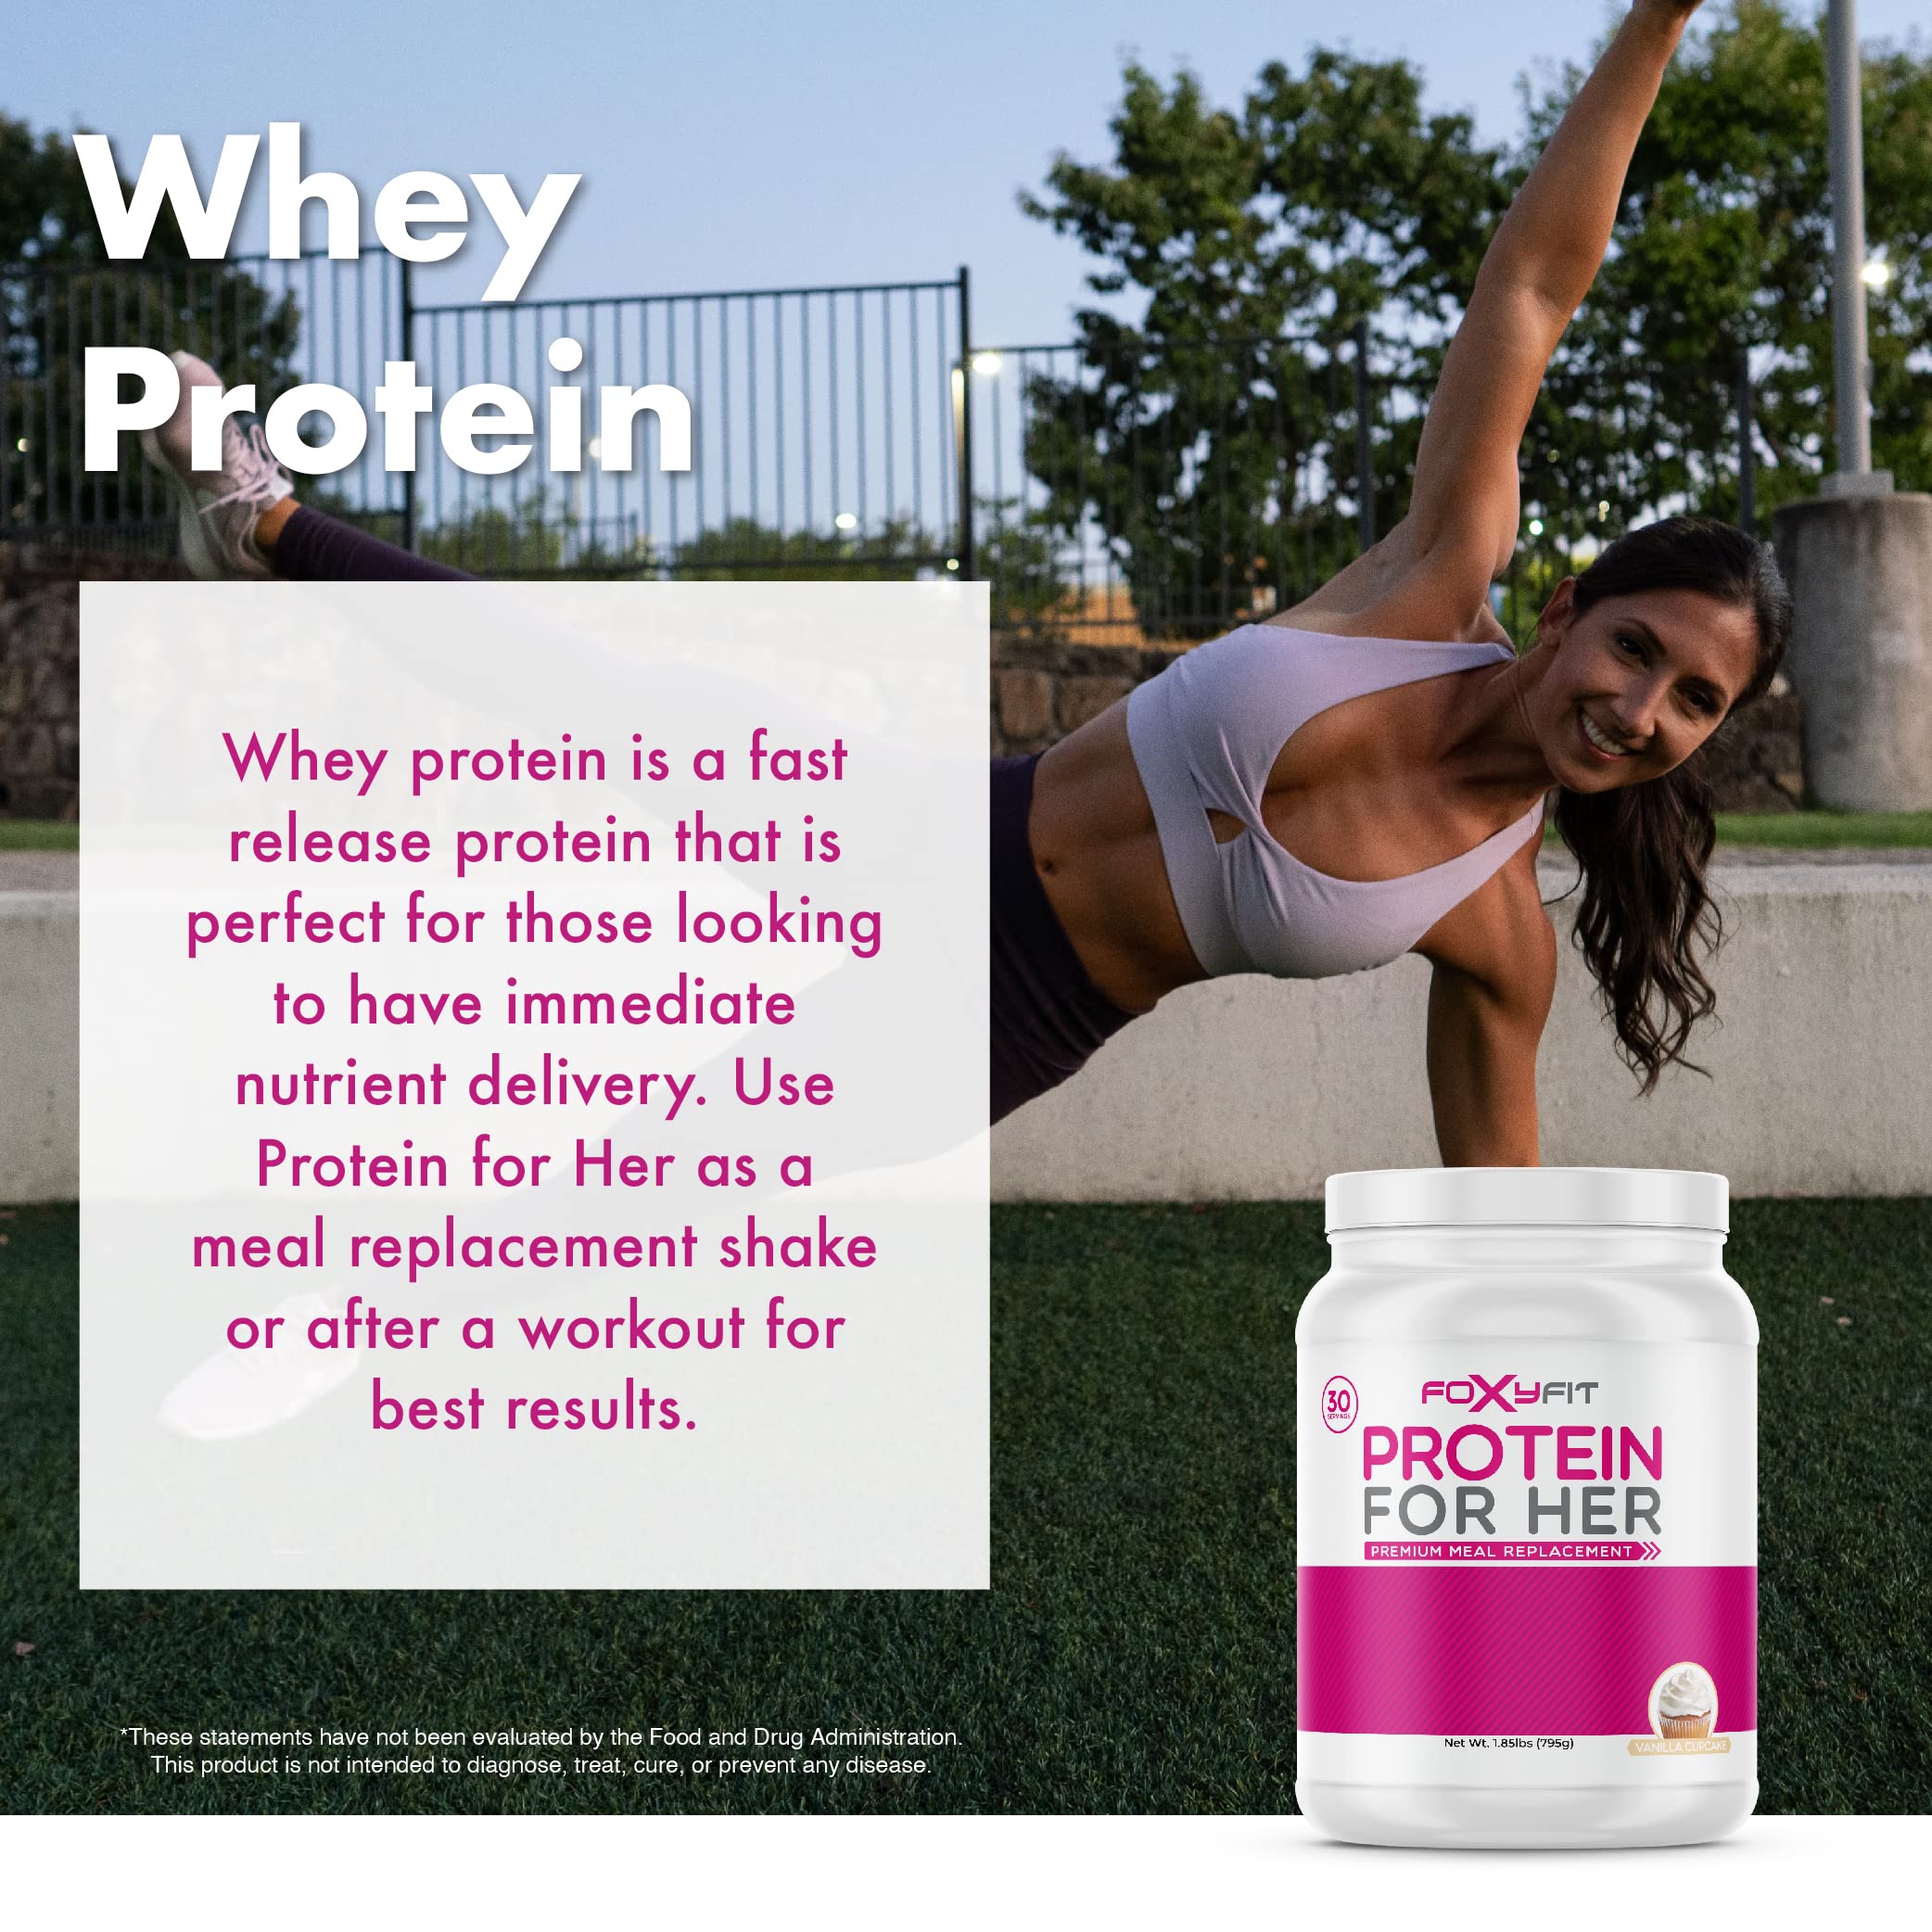 FoxyFit Protein for Her, Double Chocolate Whey Protein Powder with CLA and Biotin for a Healthy Glow (1.91 lbs)